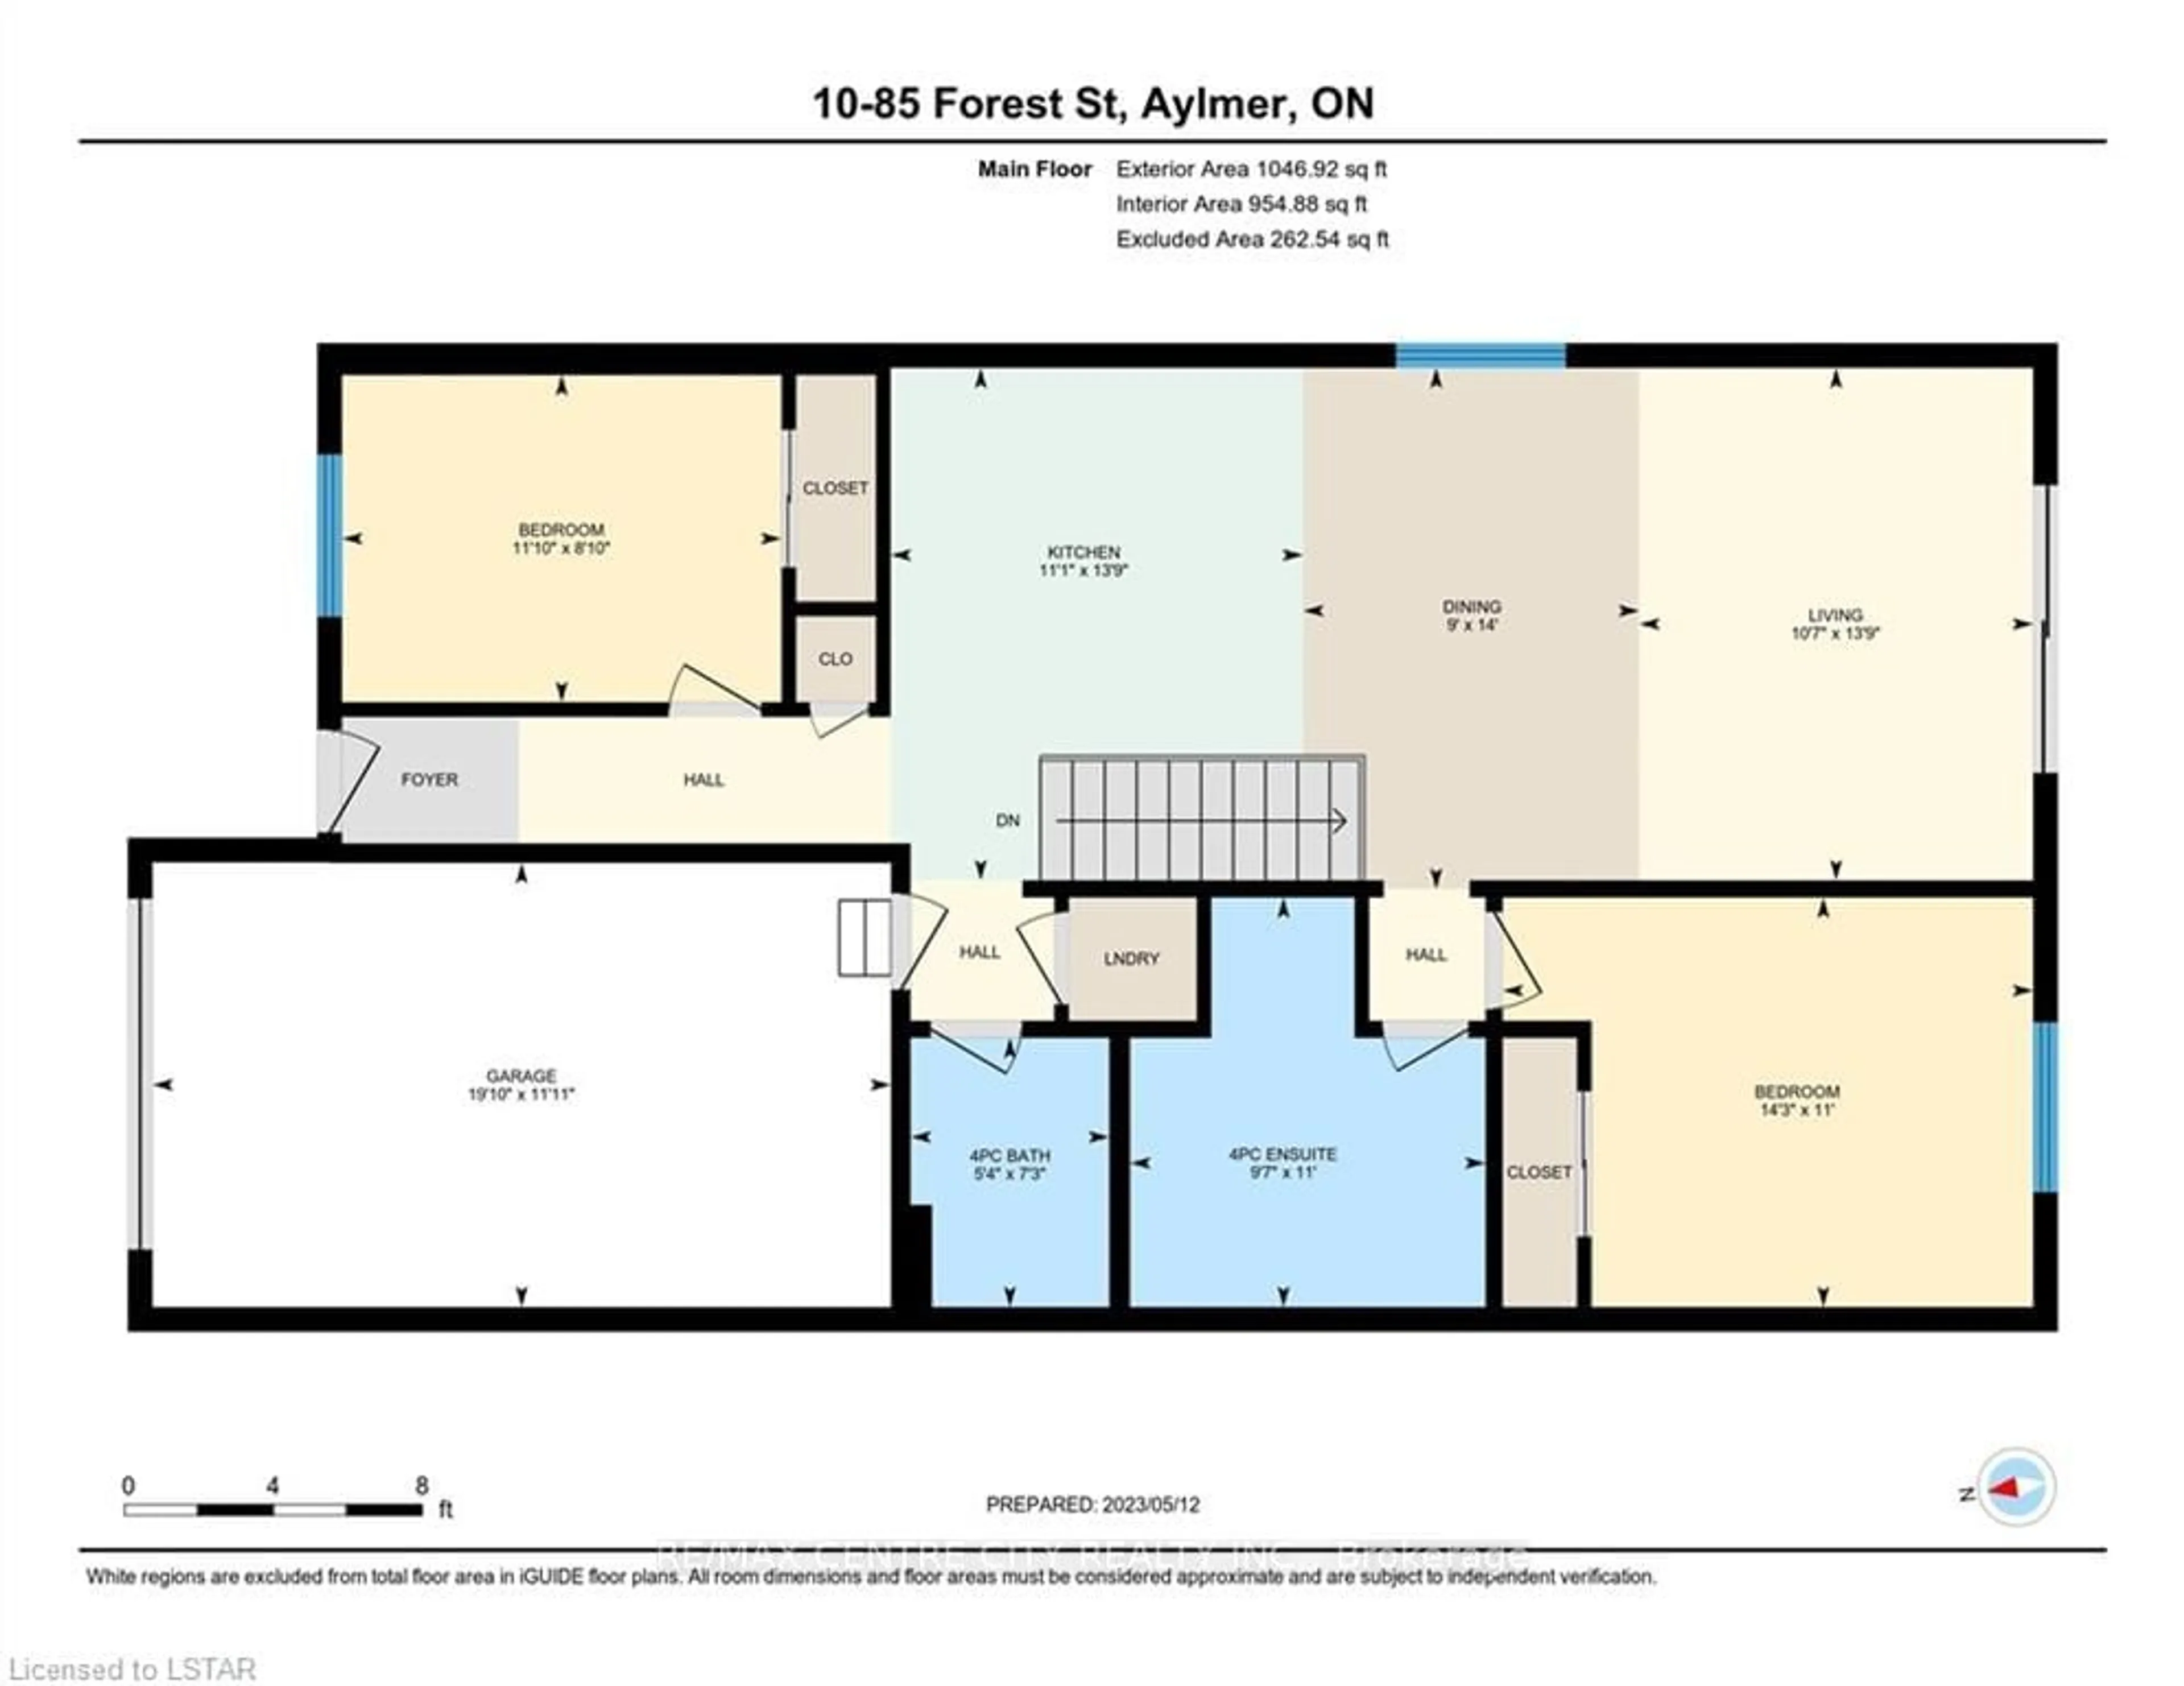 Floor plan for 85 Forest St #6, Aylmer Ontario N5H 1A5